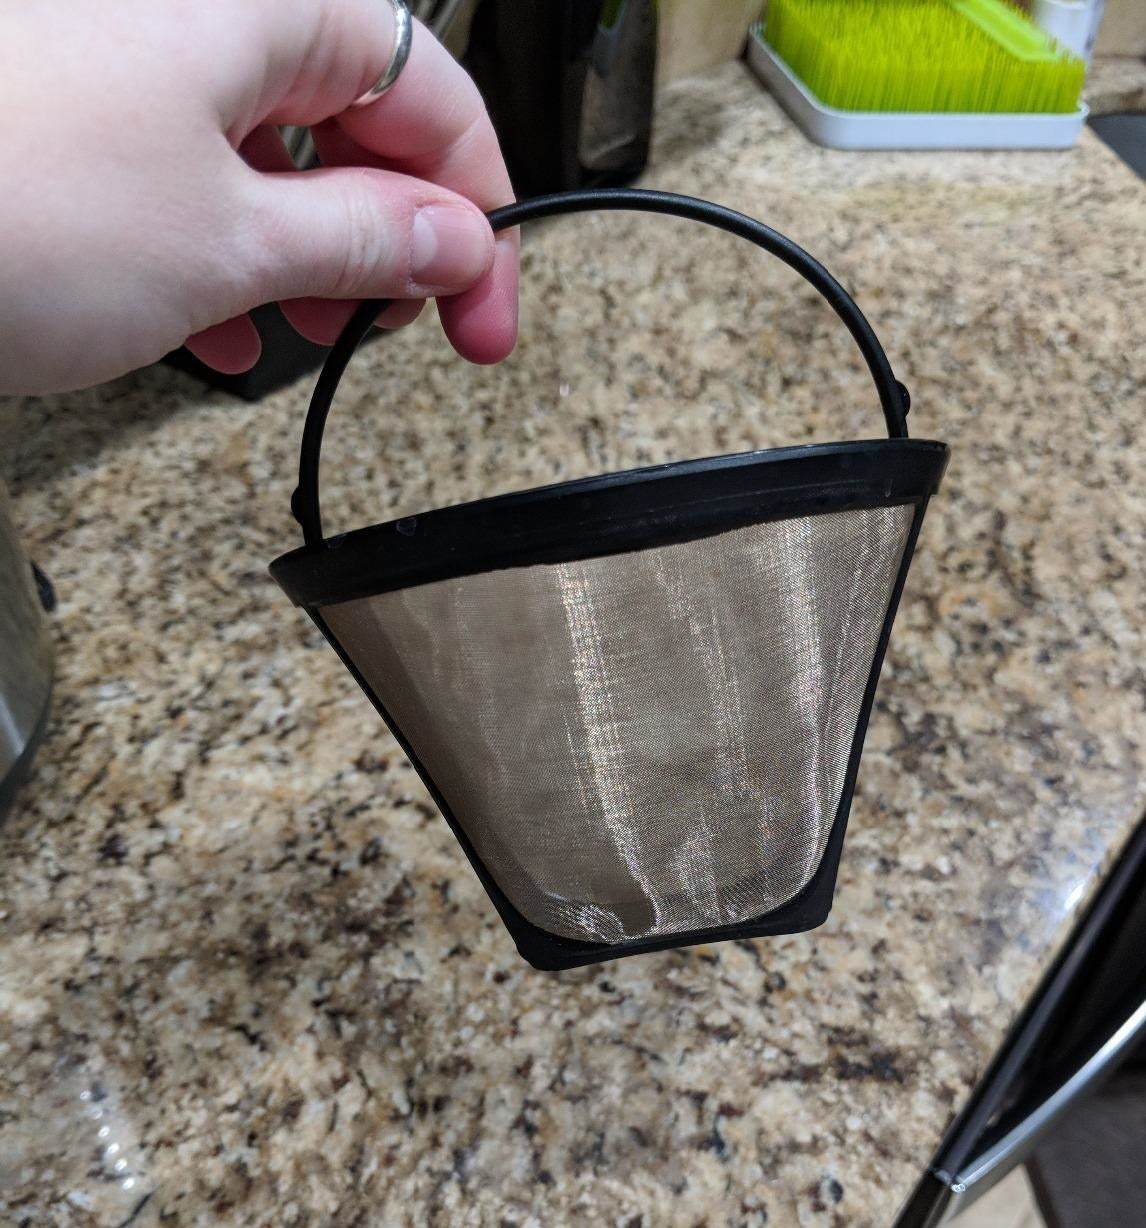 someone holding a fine mesh reusable coffee filter by its black plastic handle